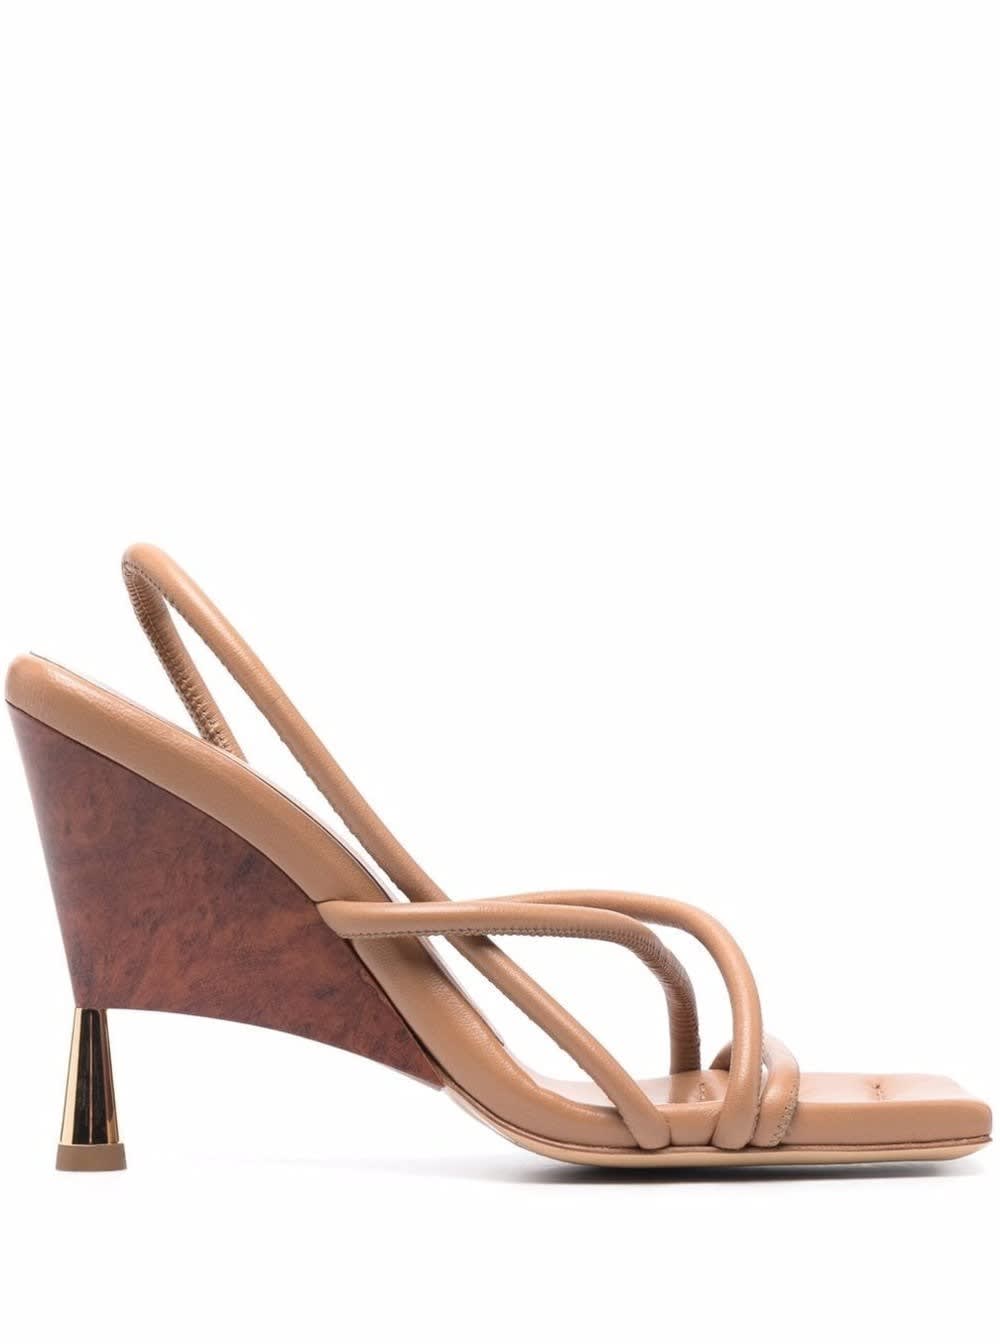 GIA COUTURE Rosie Sandals In Leather And Wedge